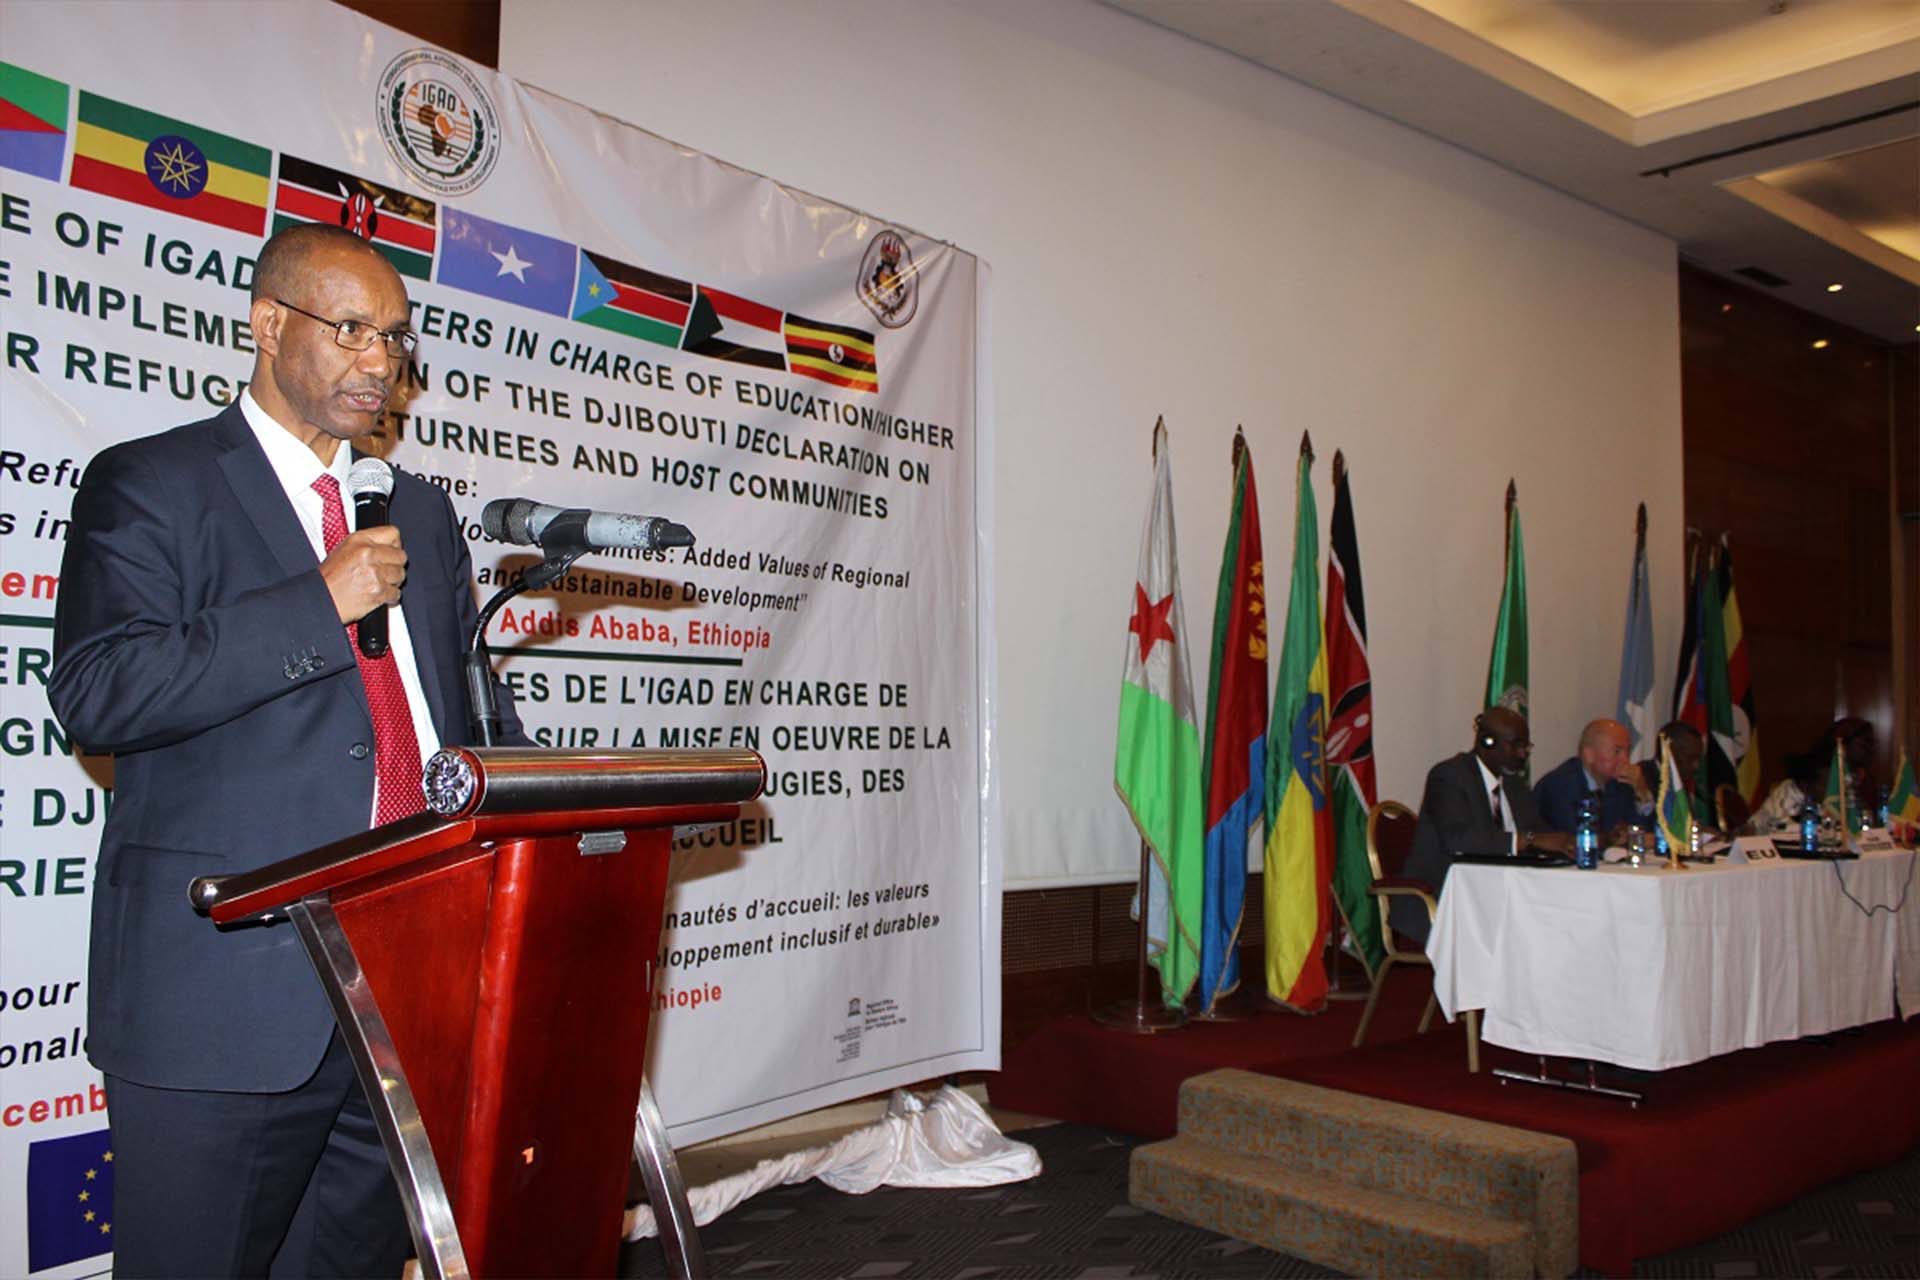 IGAD Education Ministers Step up Commitment to Refugee Education